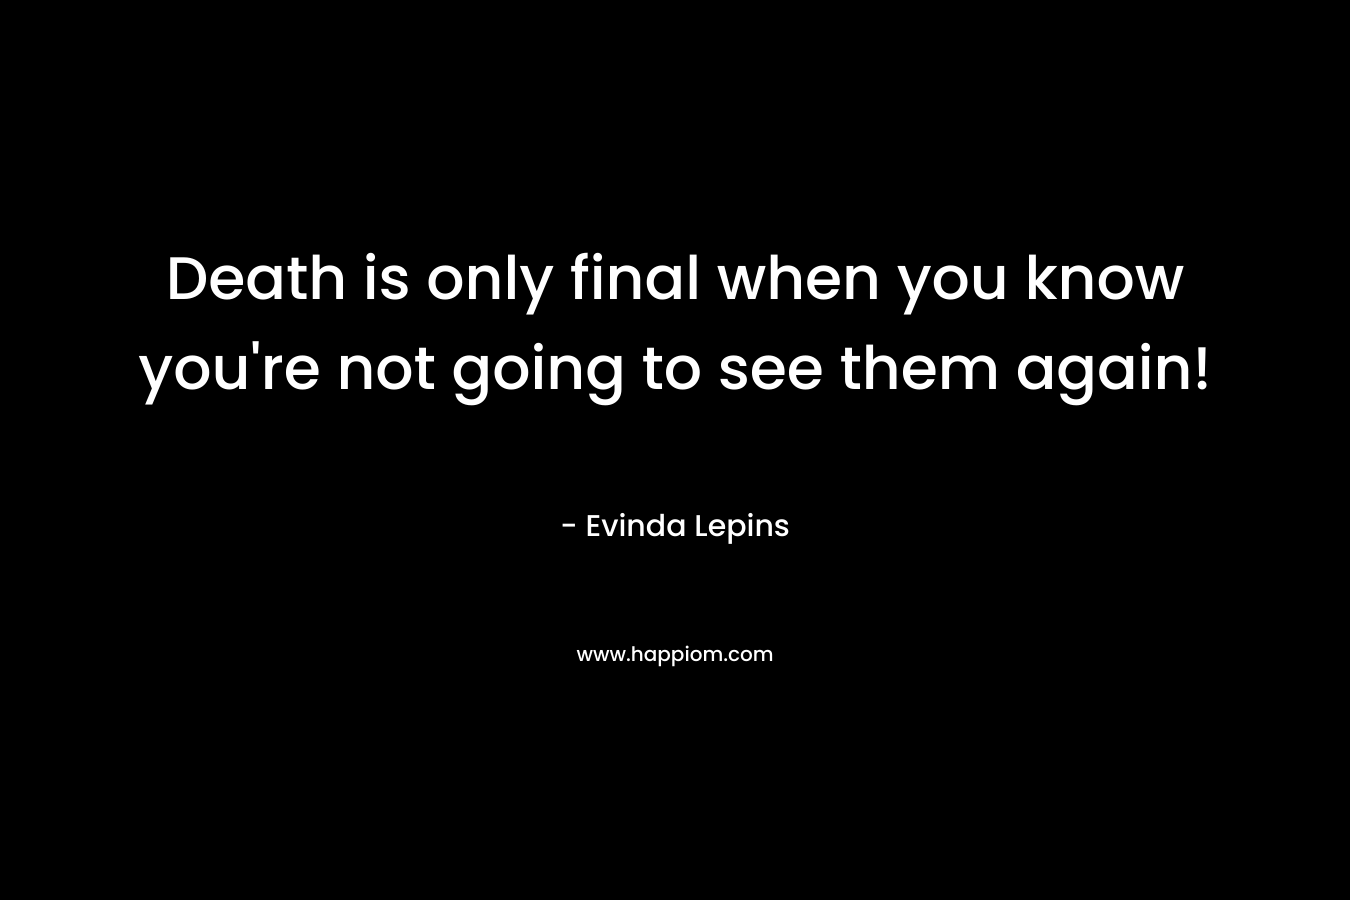 Death is only final when you know you're not going to see them again!